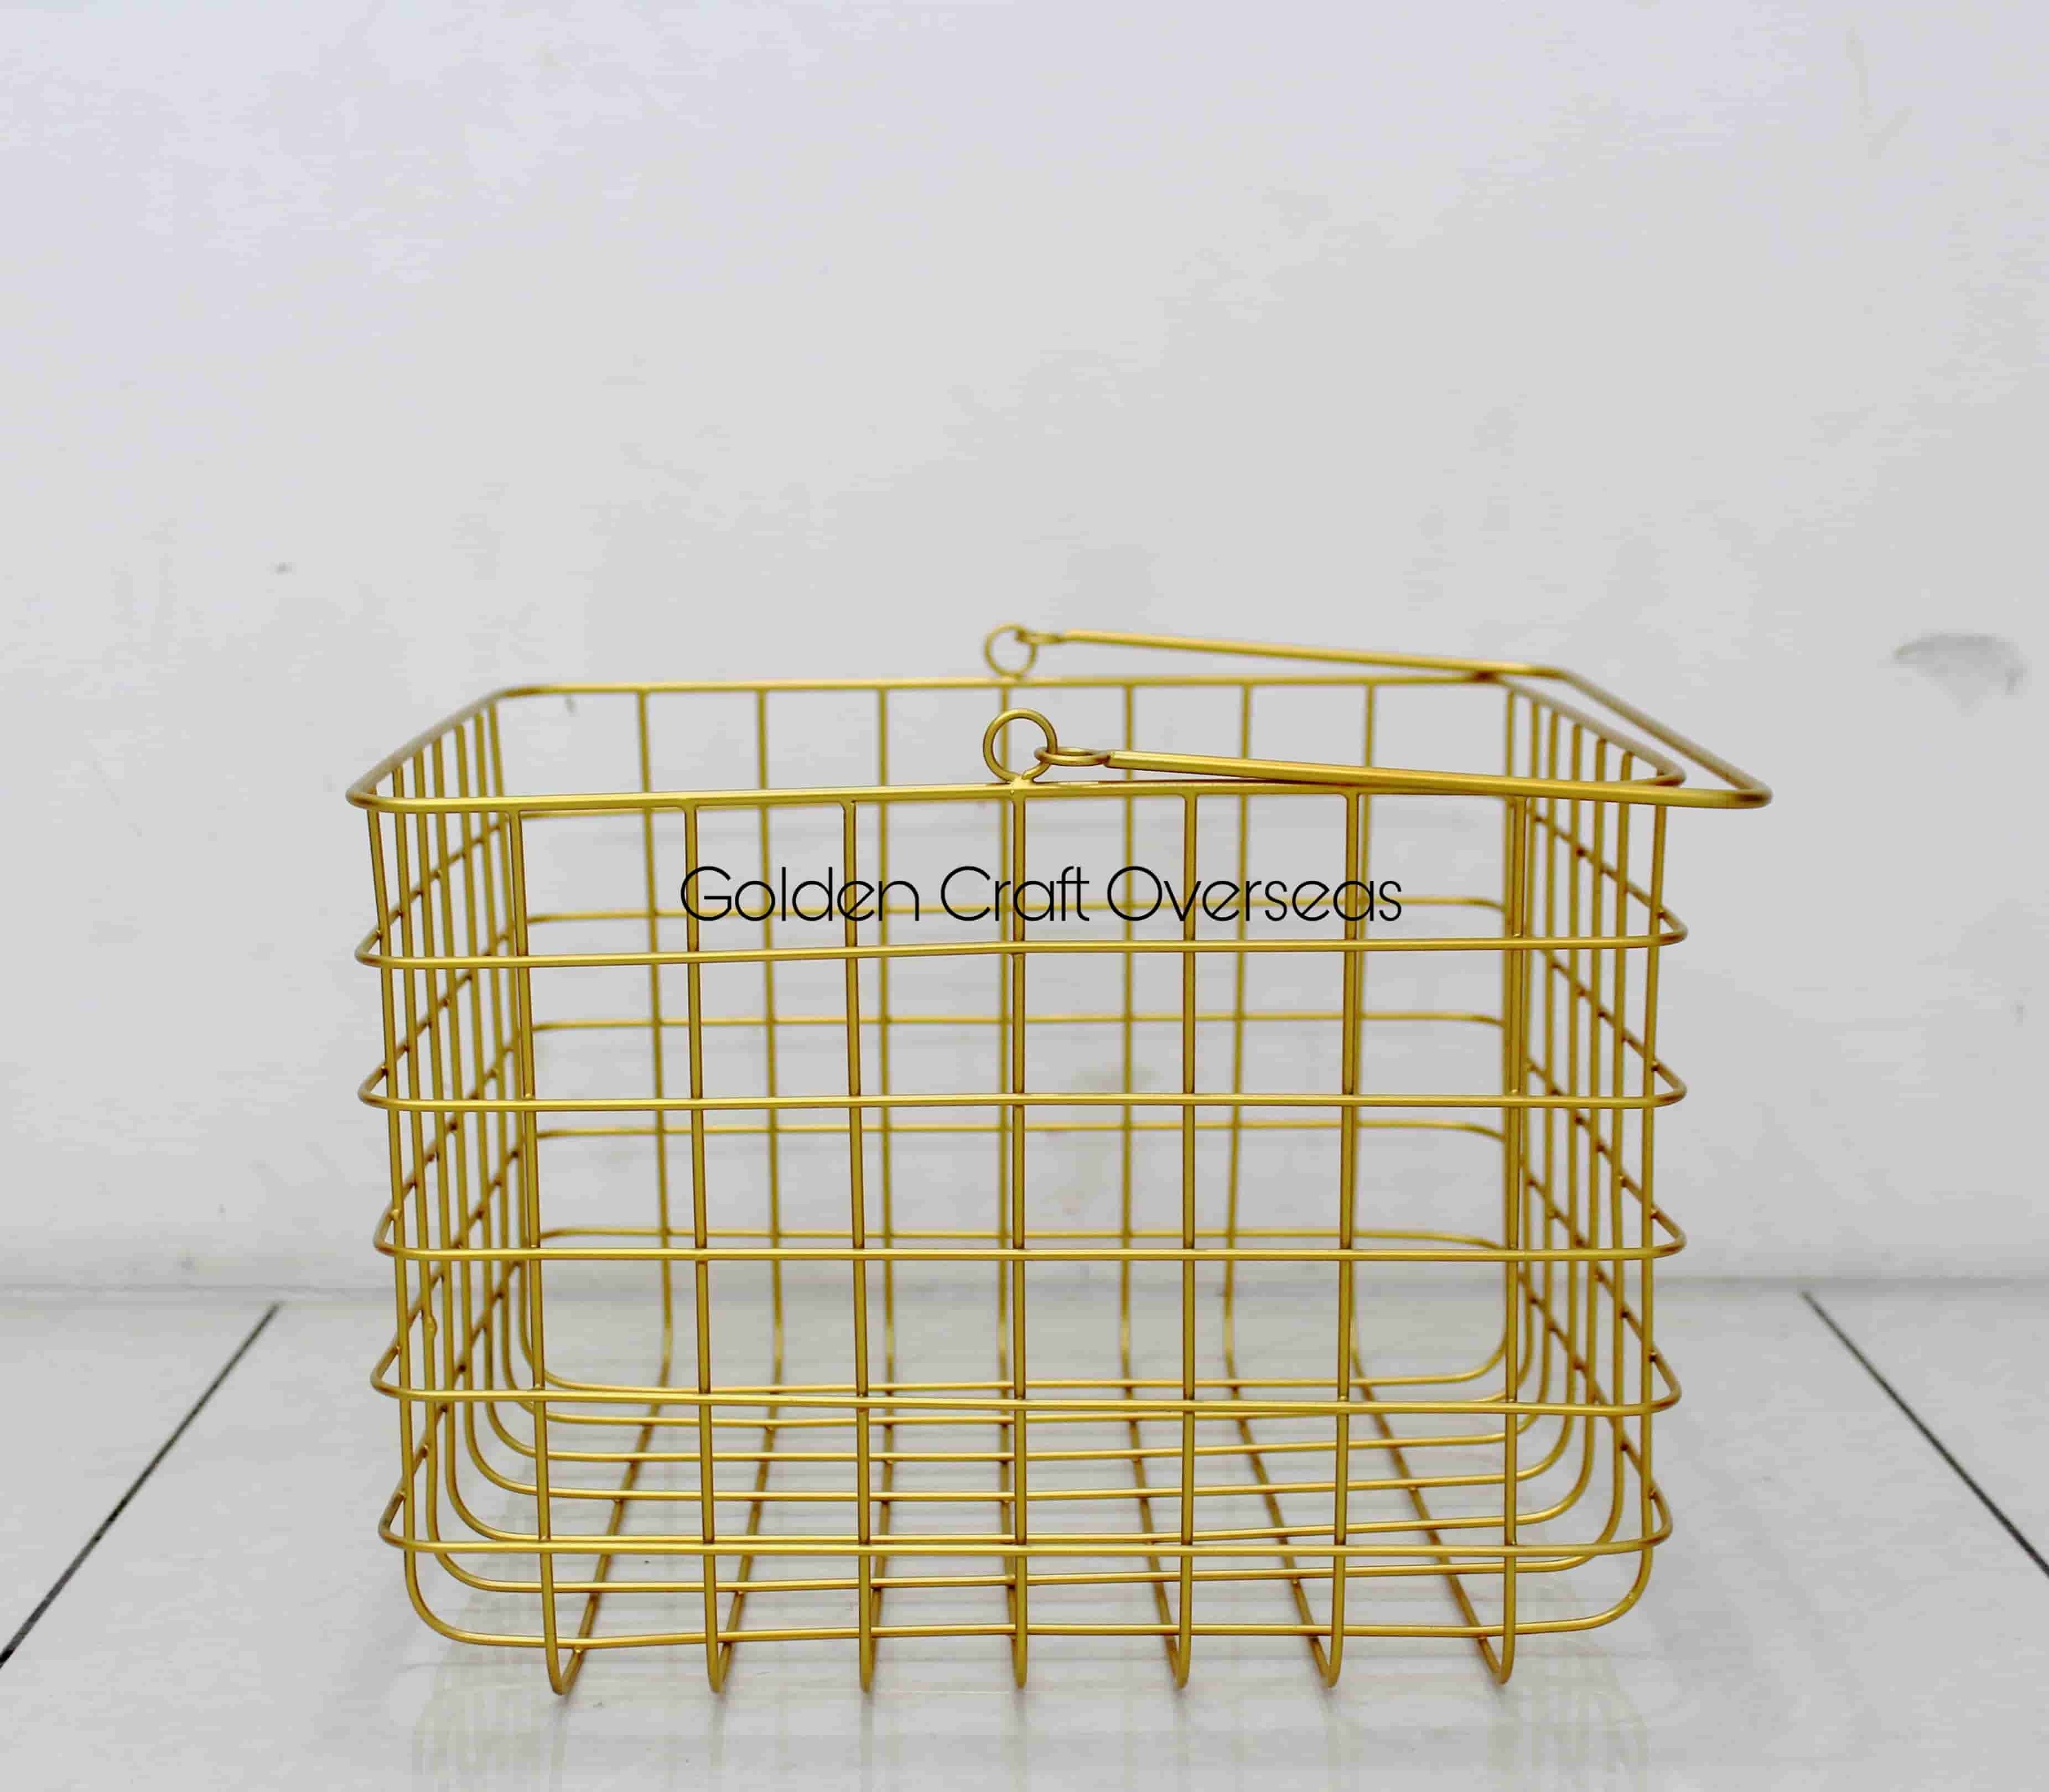 Elegant Basket with handle in gold for multi purpose use